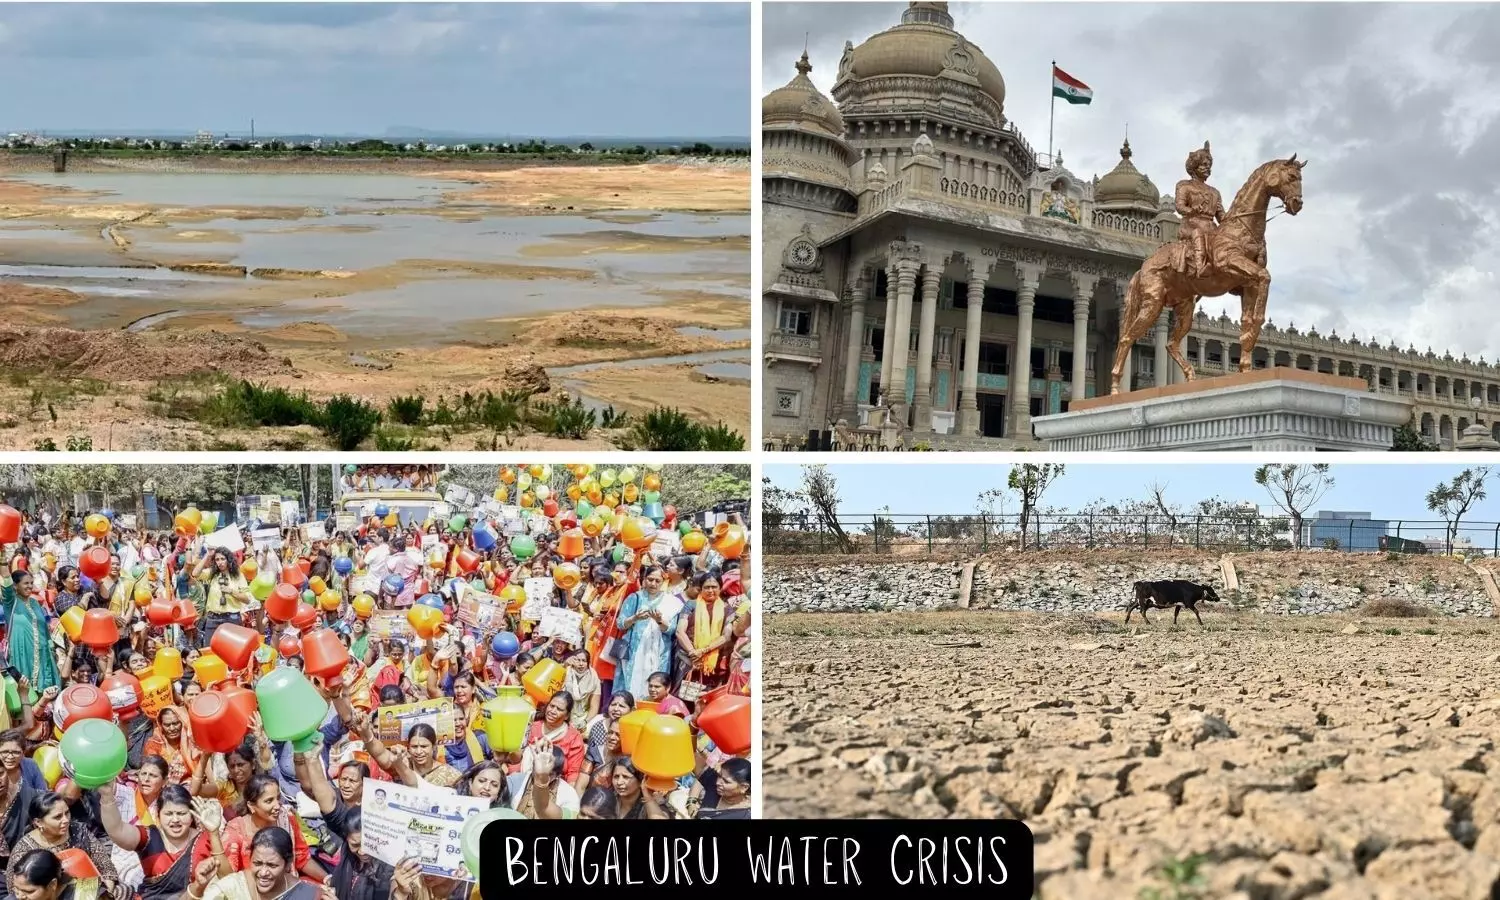 Continued mismanagement of water in Bengaluru could surpass Cape Towns crisis, warns TV Ramachandra